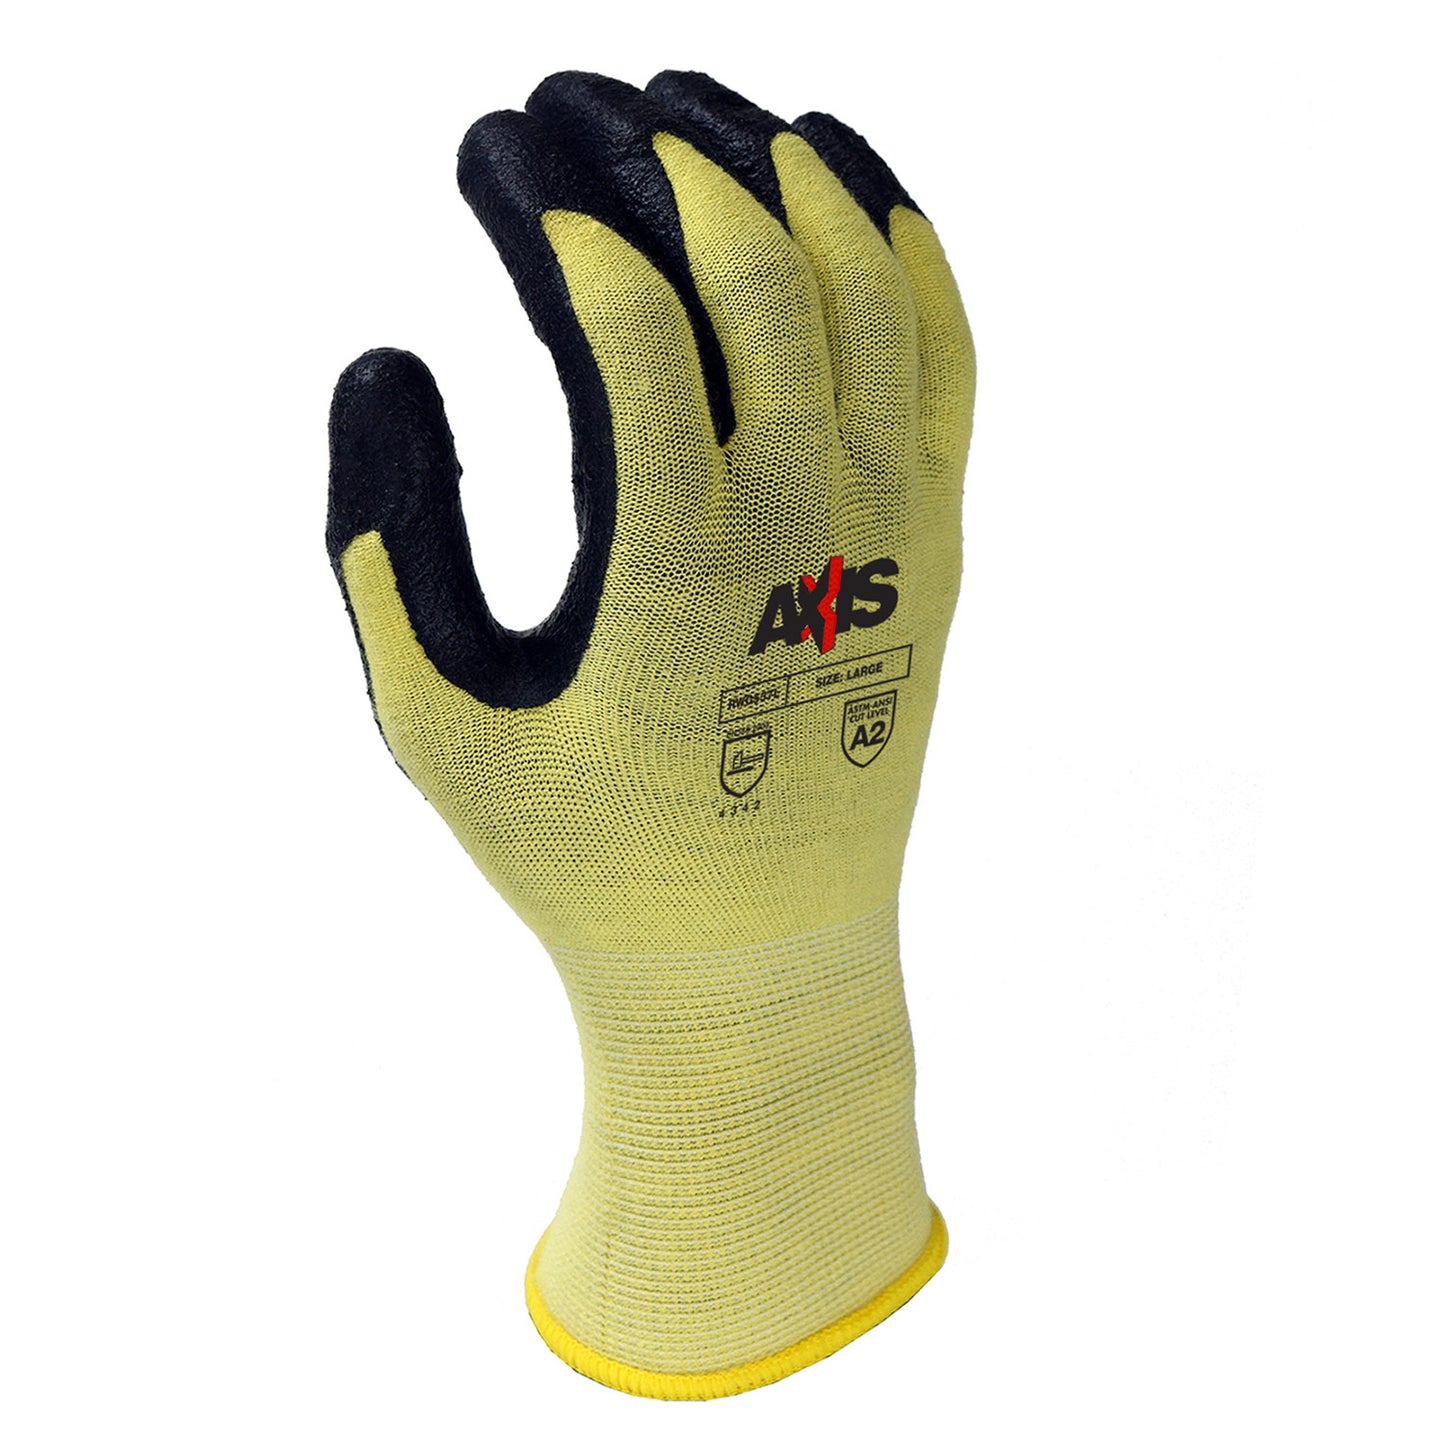 RADIANS RWG537 AXIS™ CUT PROTECTION LEVEL A2 KEVLAR WORK GLOVE